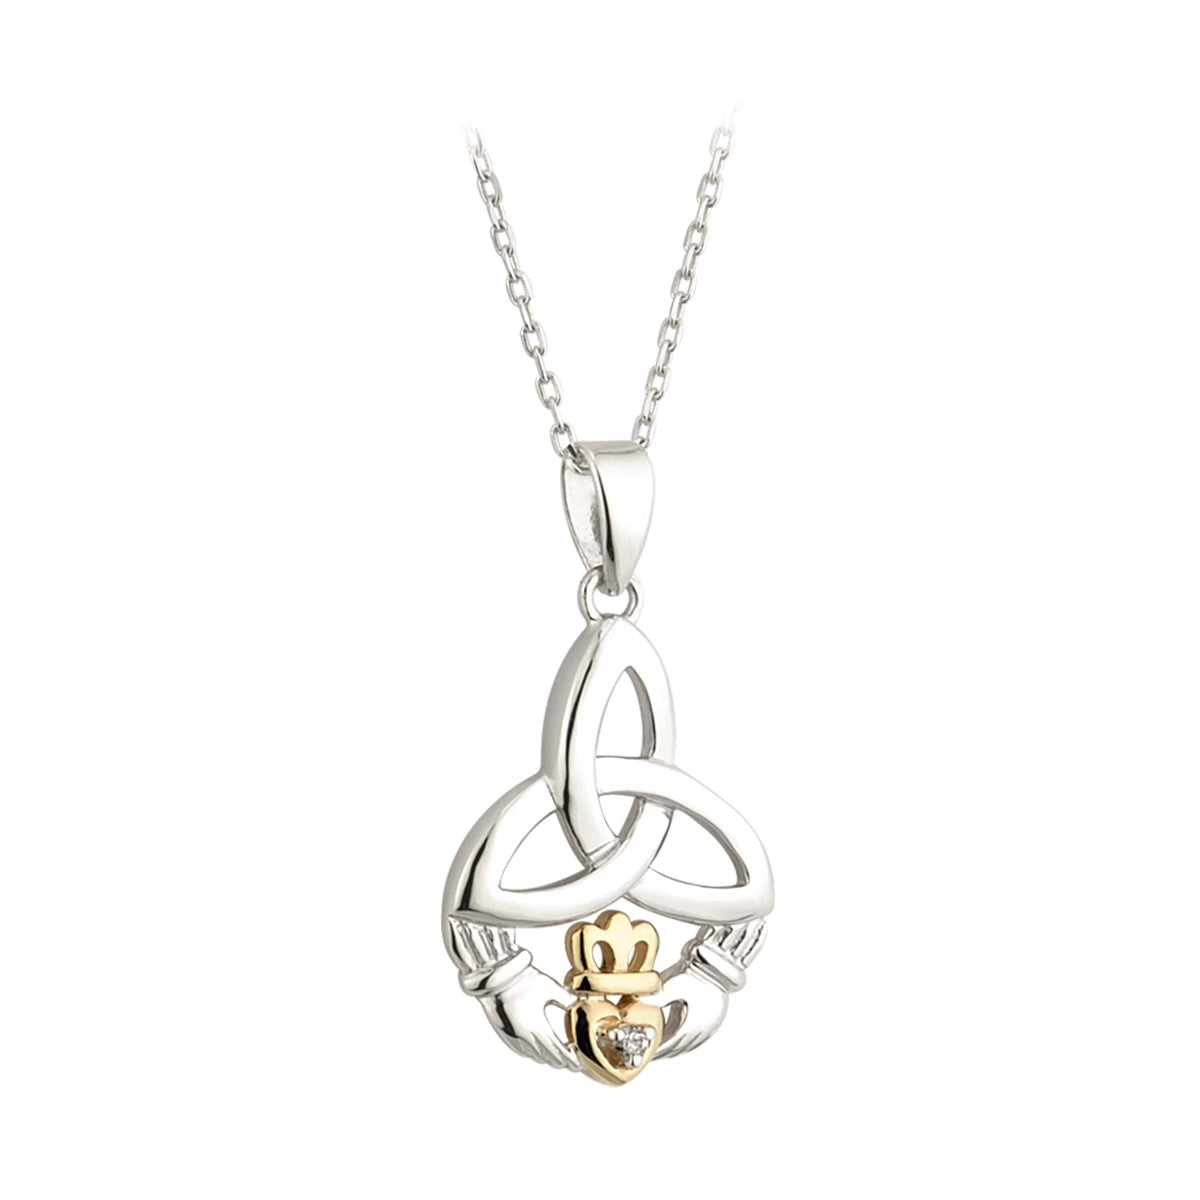 sterling silver and 10k gold diamond trinity knot claddagh pendant s45344 from Solvar